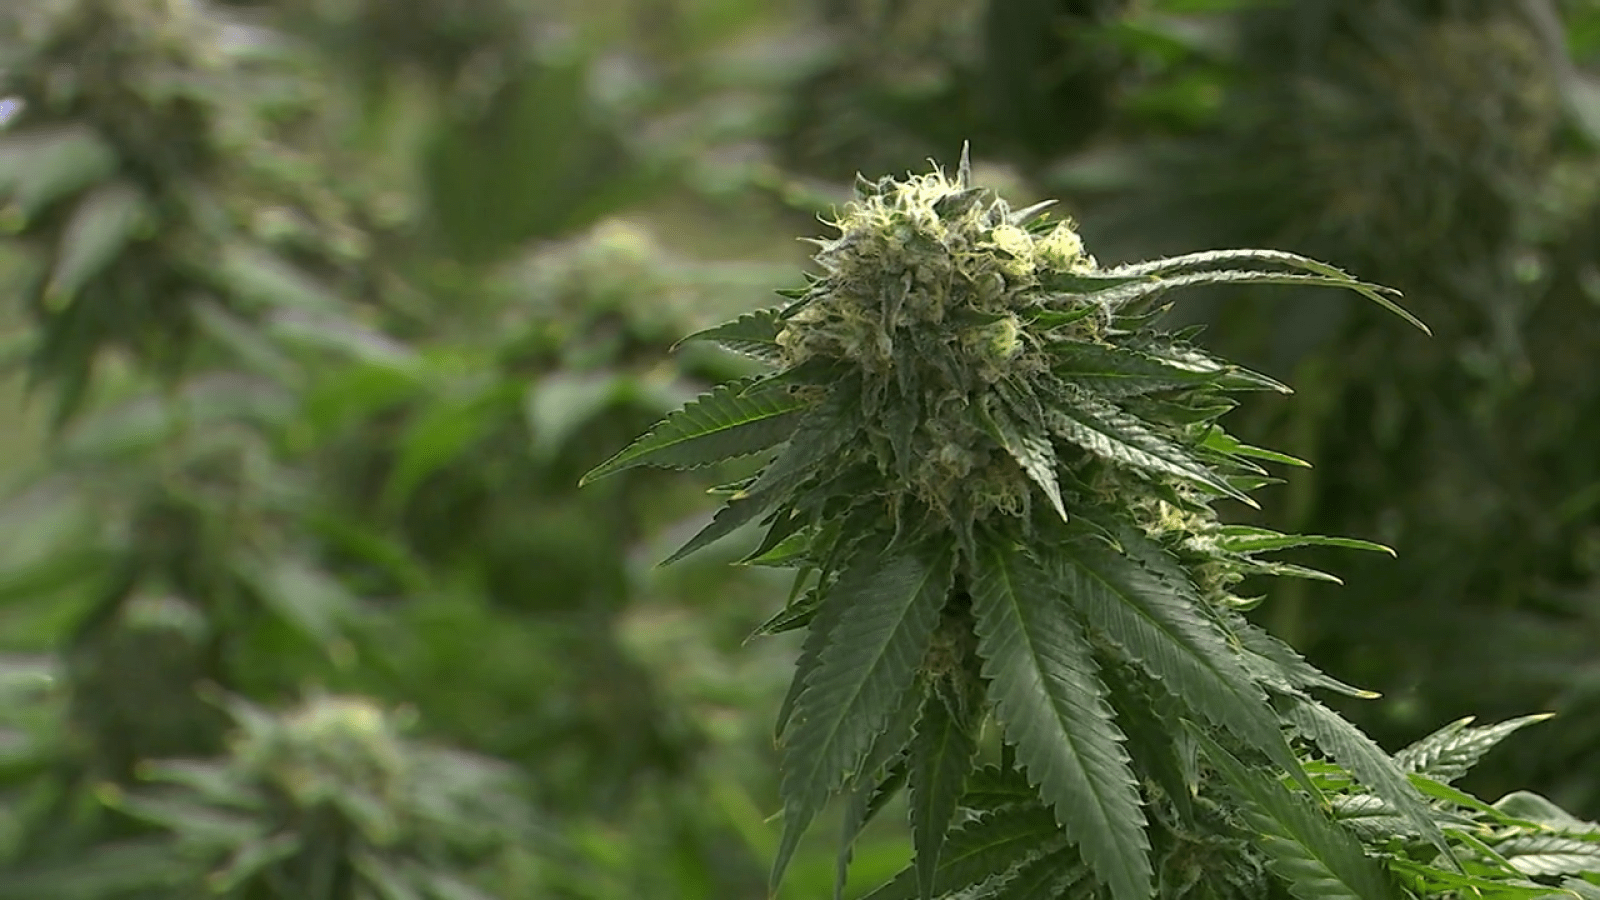 Survey on marijuana use while driving in Virginia ‘troubling’